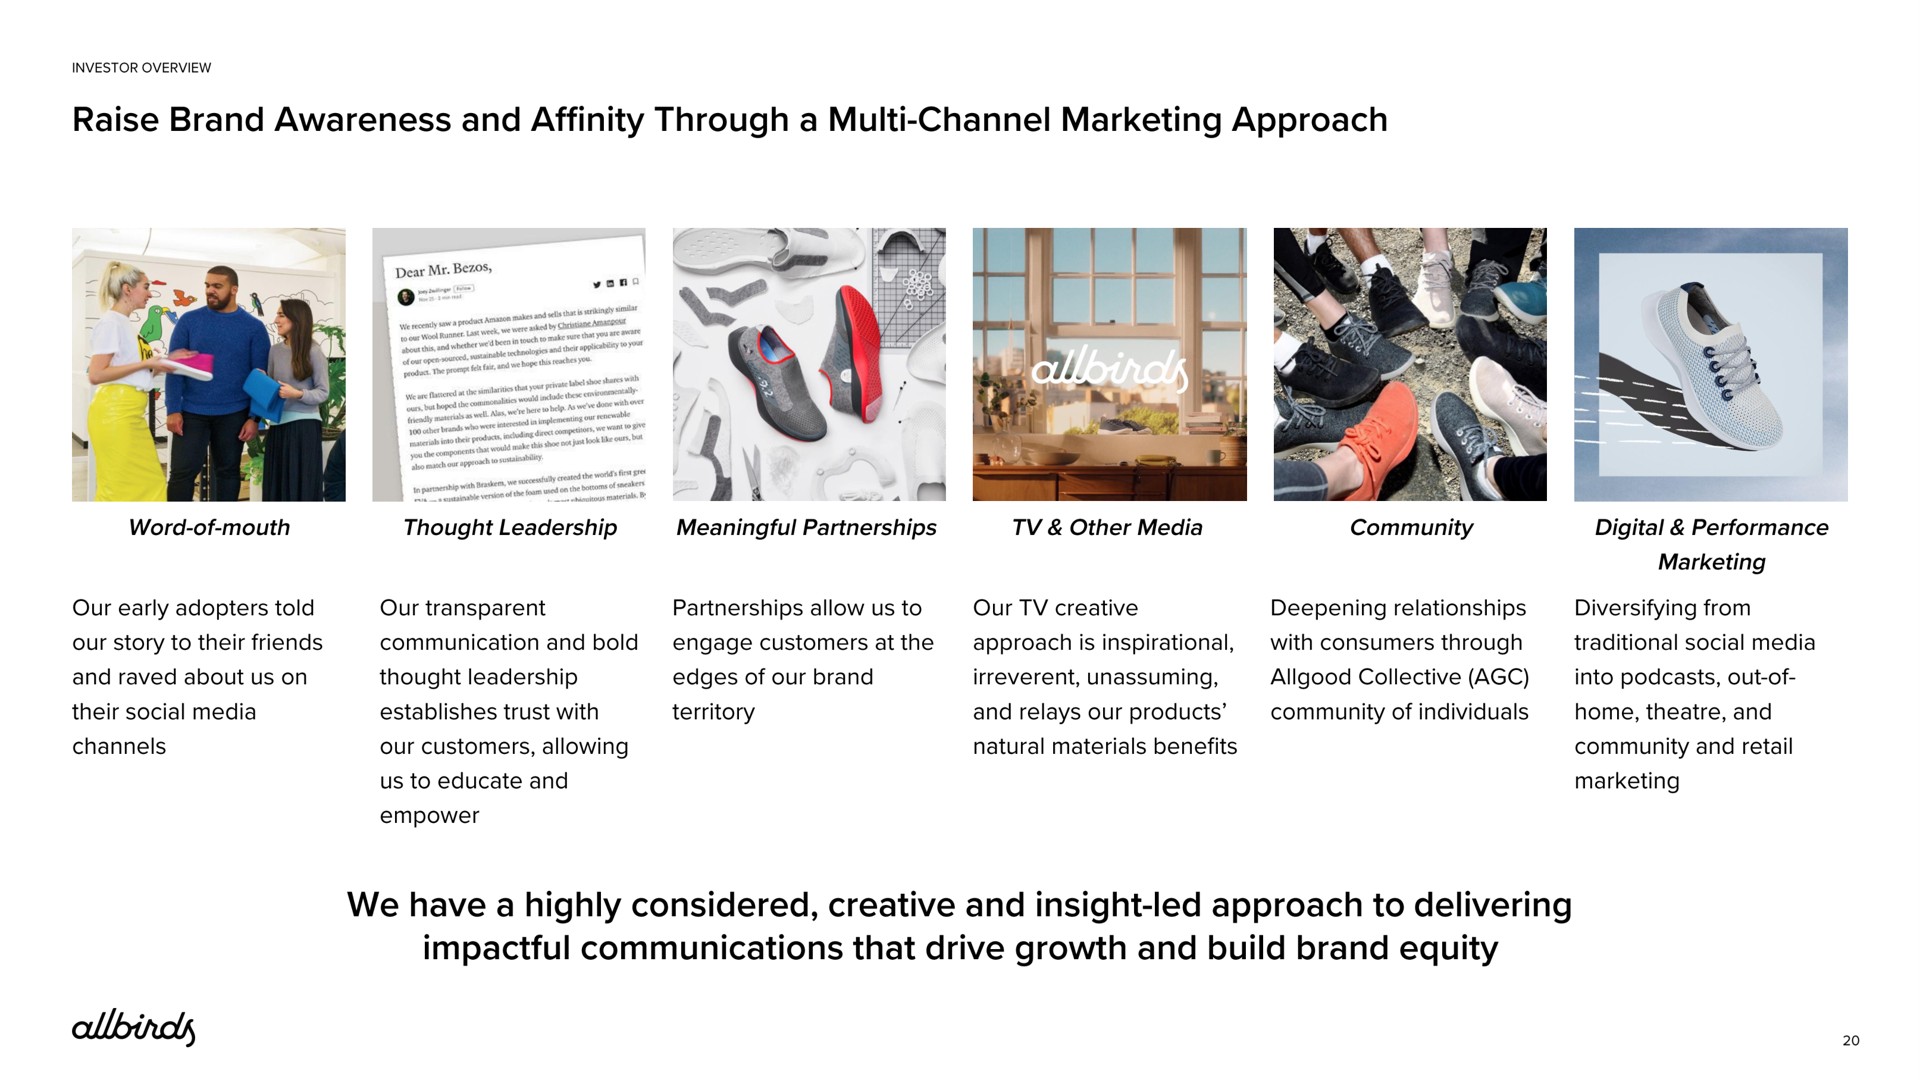 raise brand awareness and affinity through a channel marketing approach we have a highly considered creative and insight led approach to delivering communications that drive growth and build brand equity | Allbirds